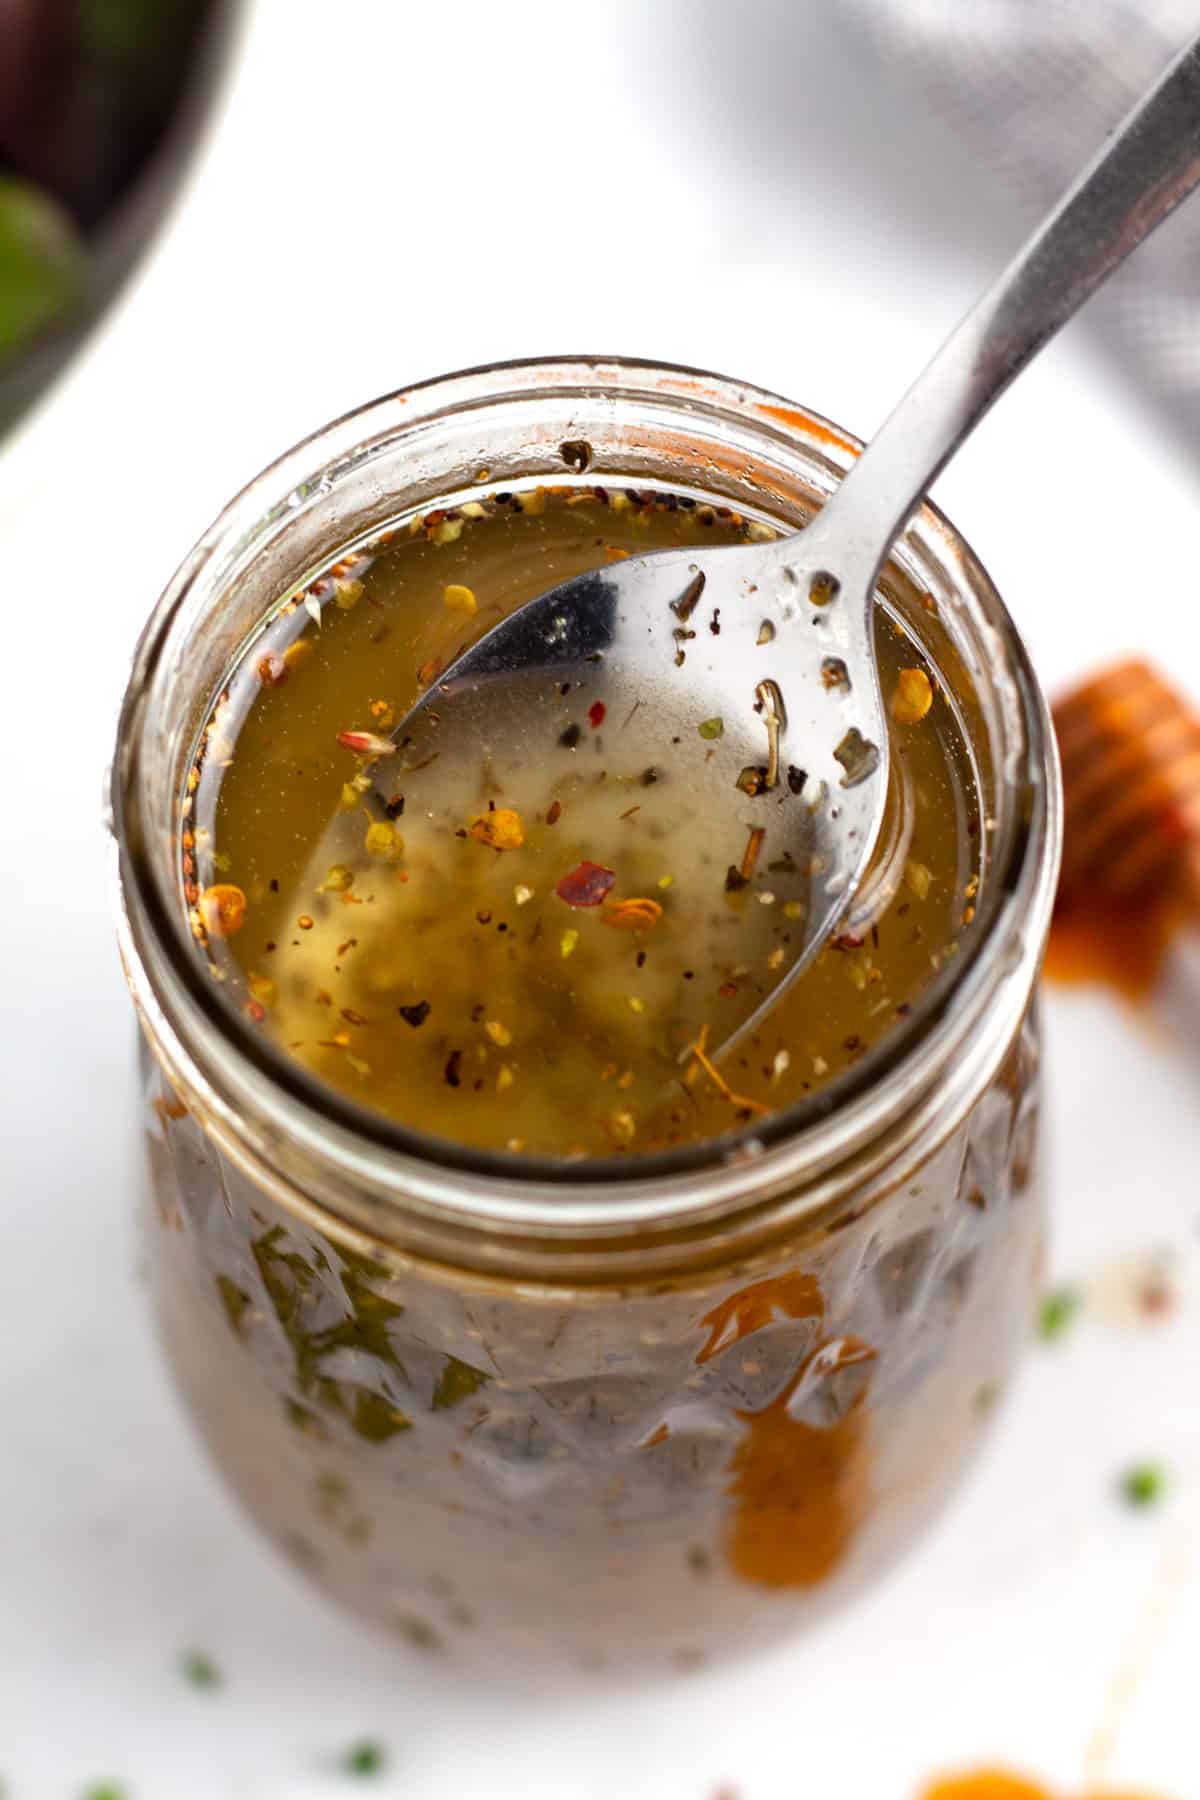 A close view of a spoon coming out of a jar of salad dressing.